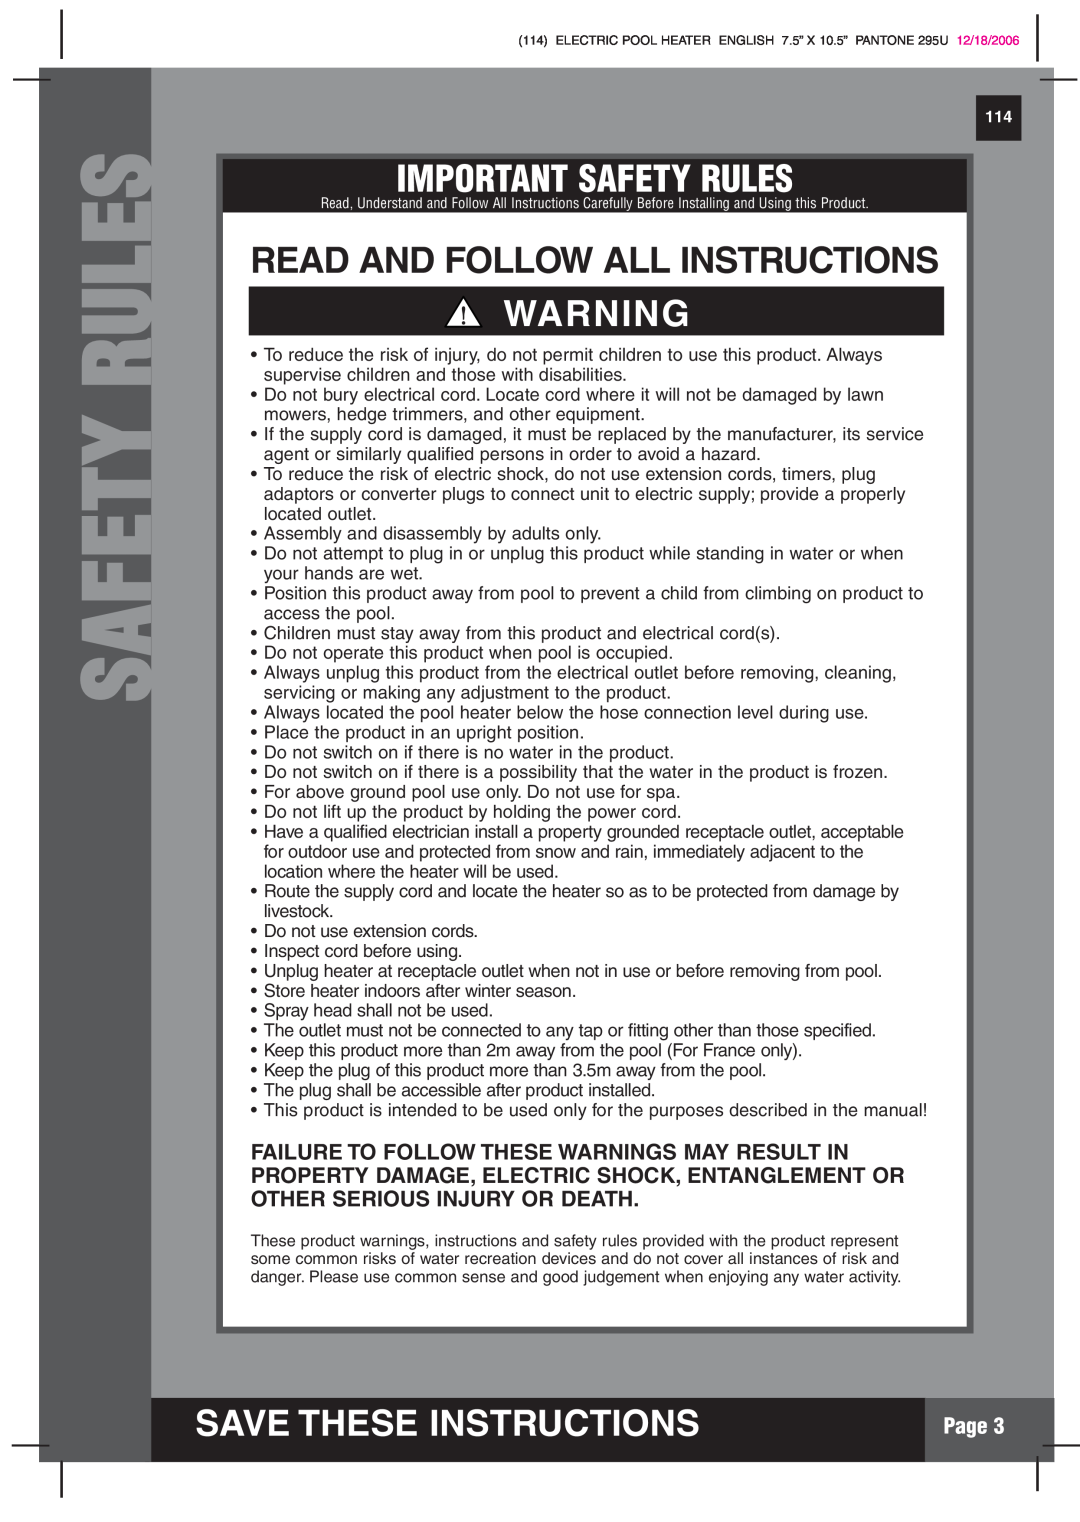 Intex Recreation HT30220 manual Important Safety Rules, Read And Follow All Instructions, Save These Instructions, Page 